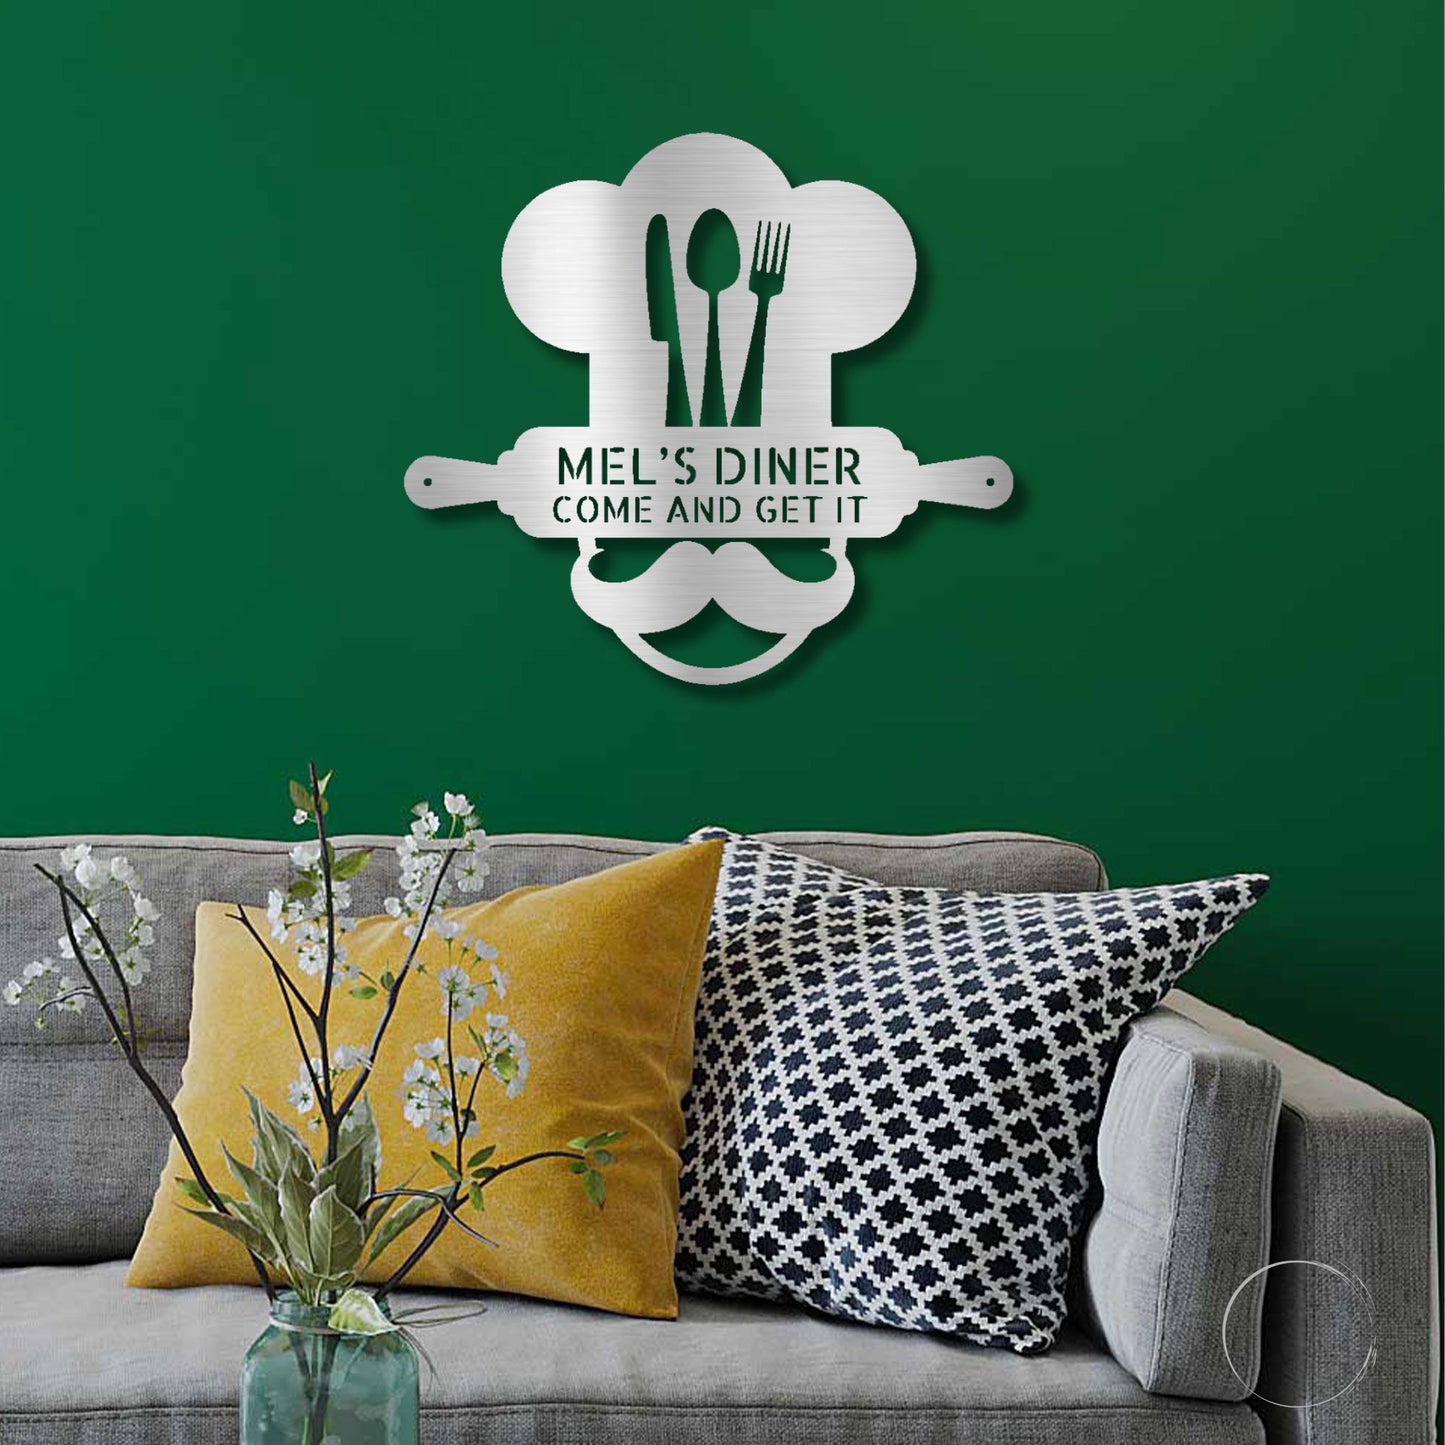 Personalized Diner Metal Wall Art: Where Every Meal is Your Signature Dish